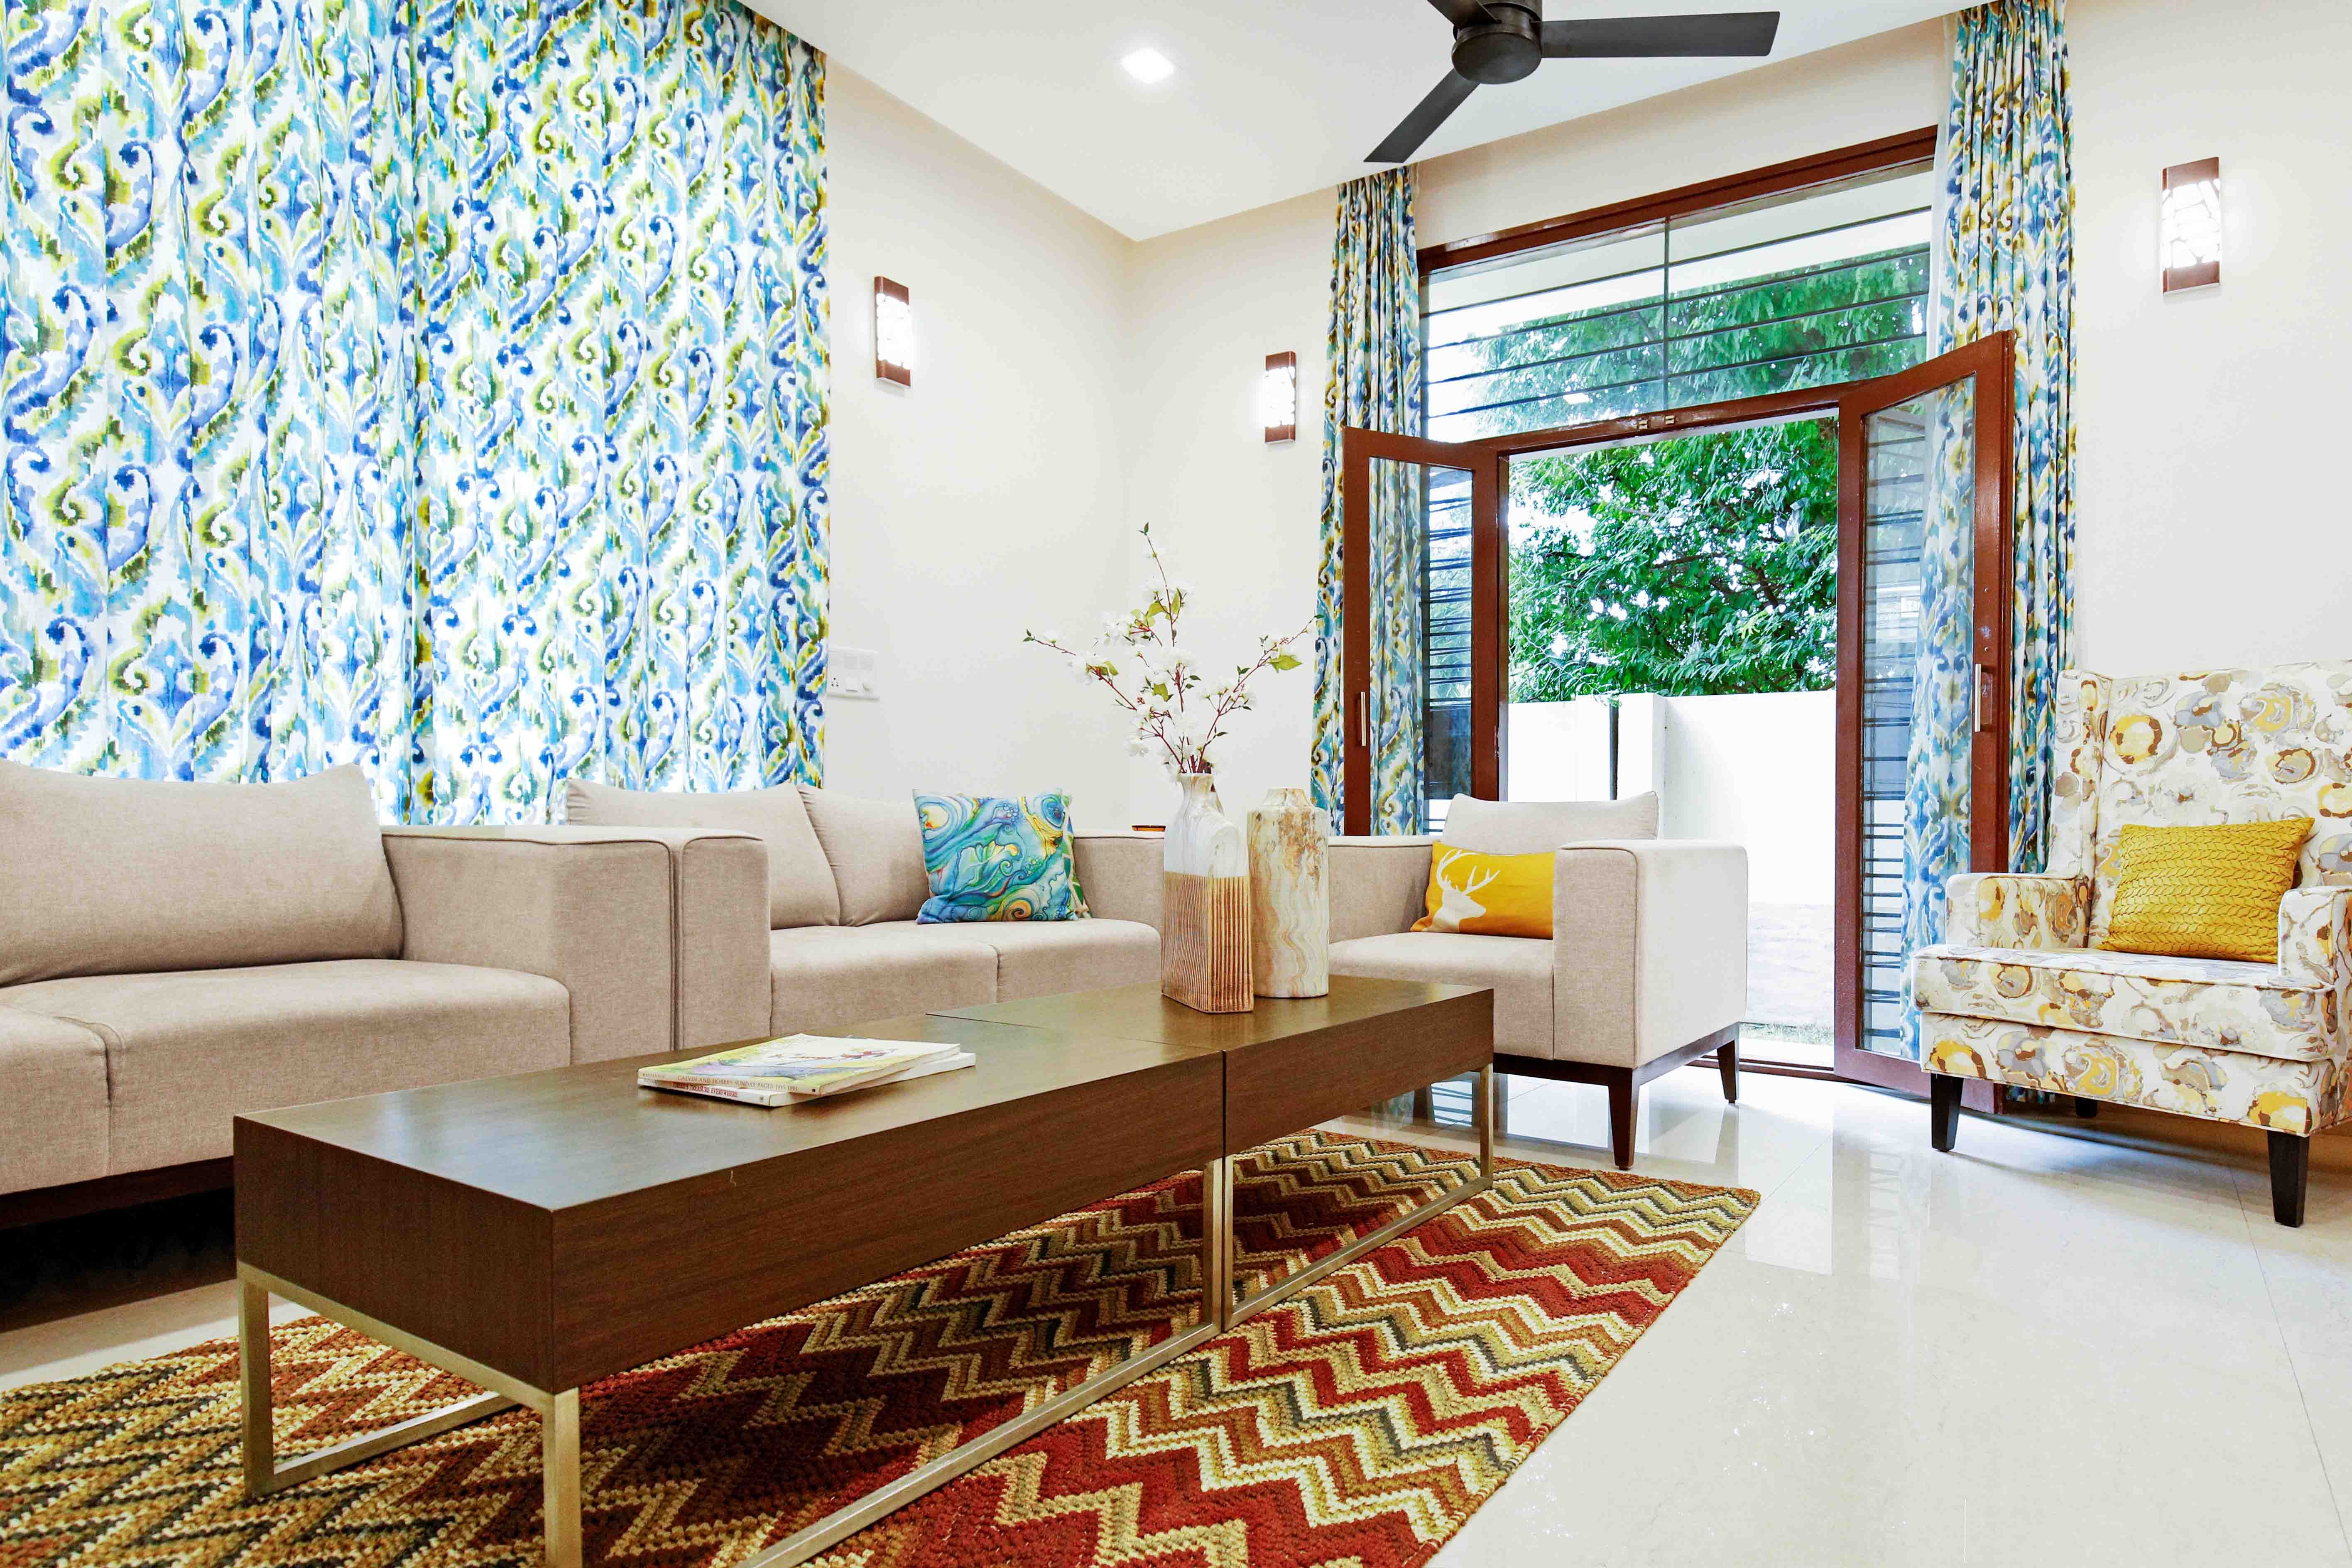 Contemporary 3-BHK Flat In Bangalore With Yellow And Beige Guest Room